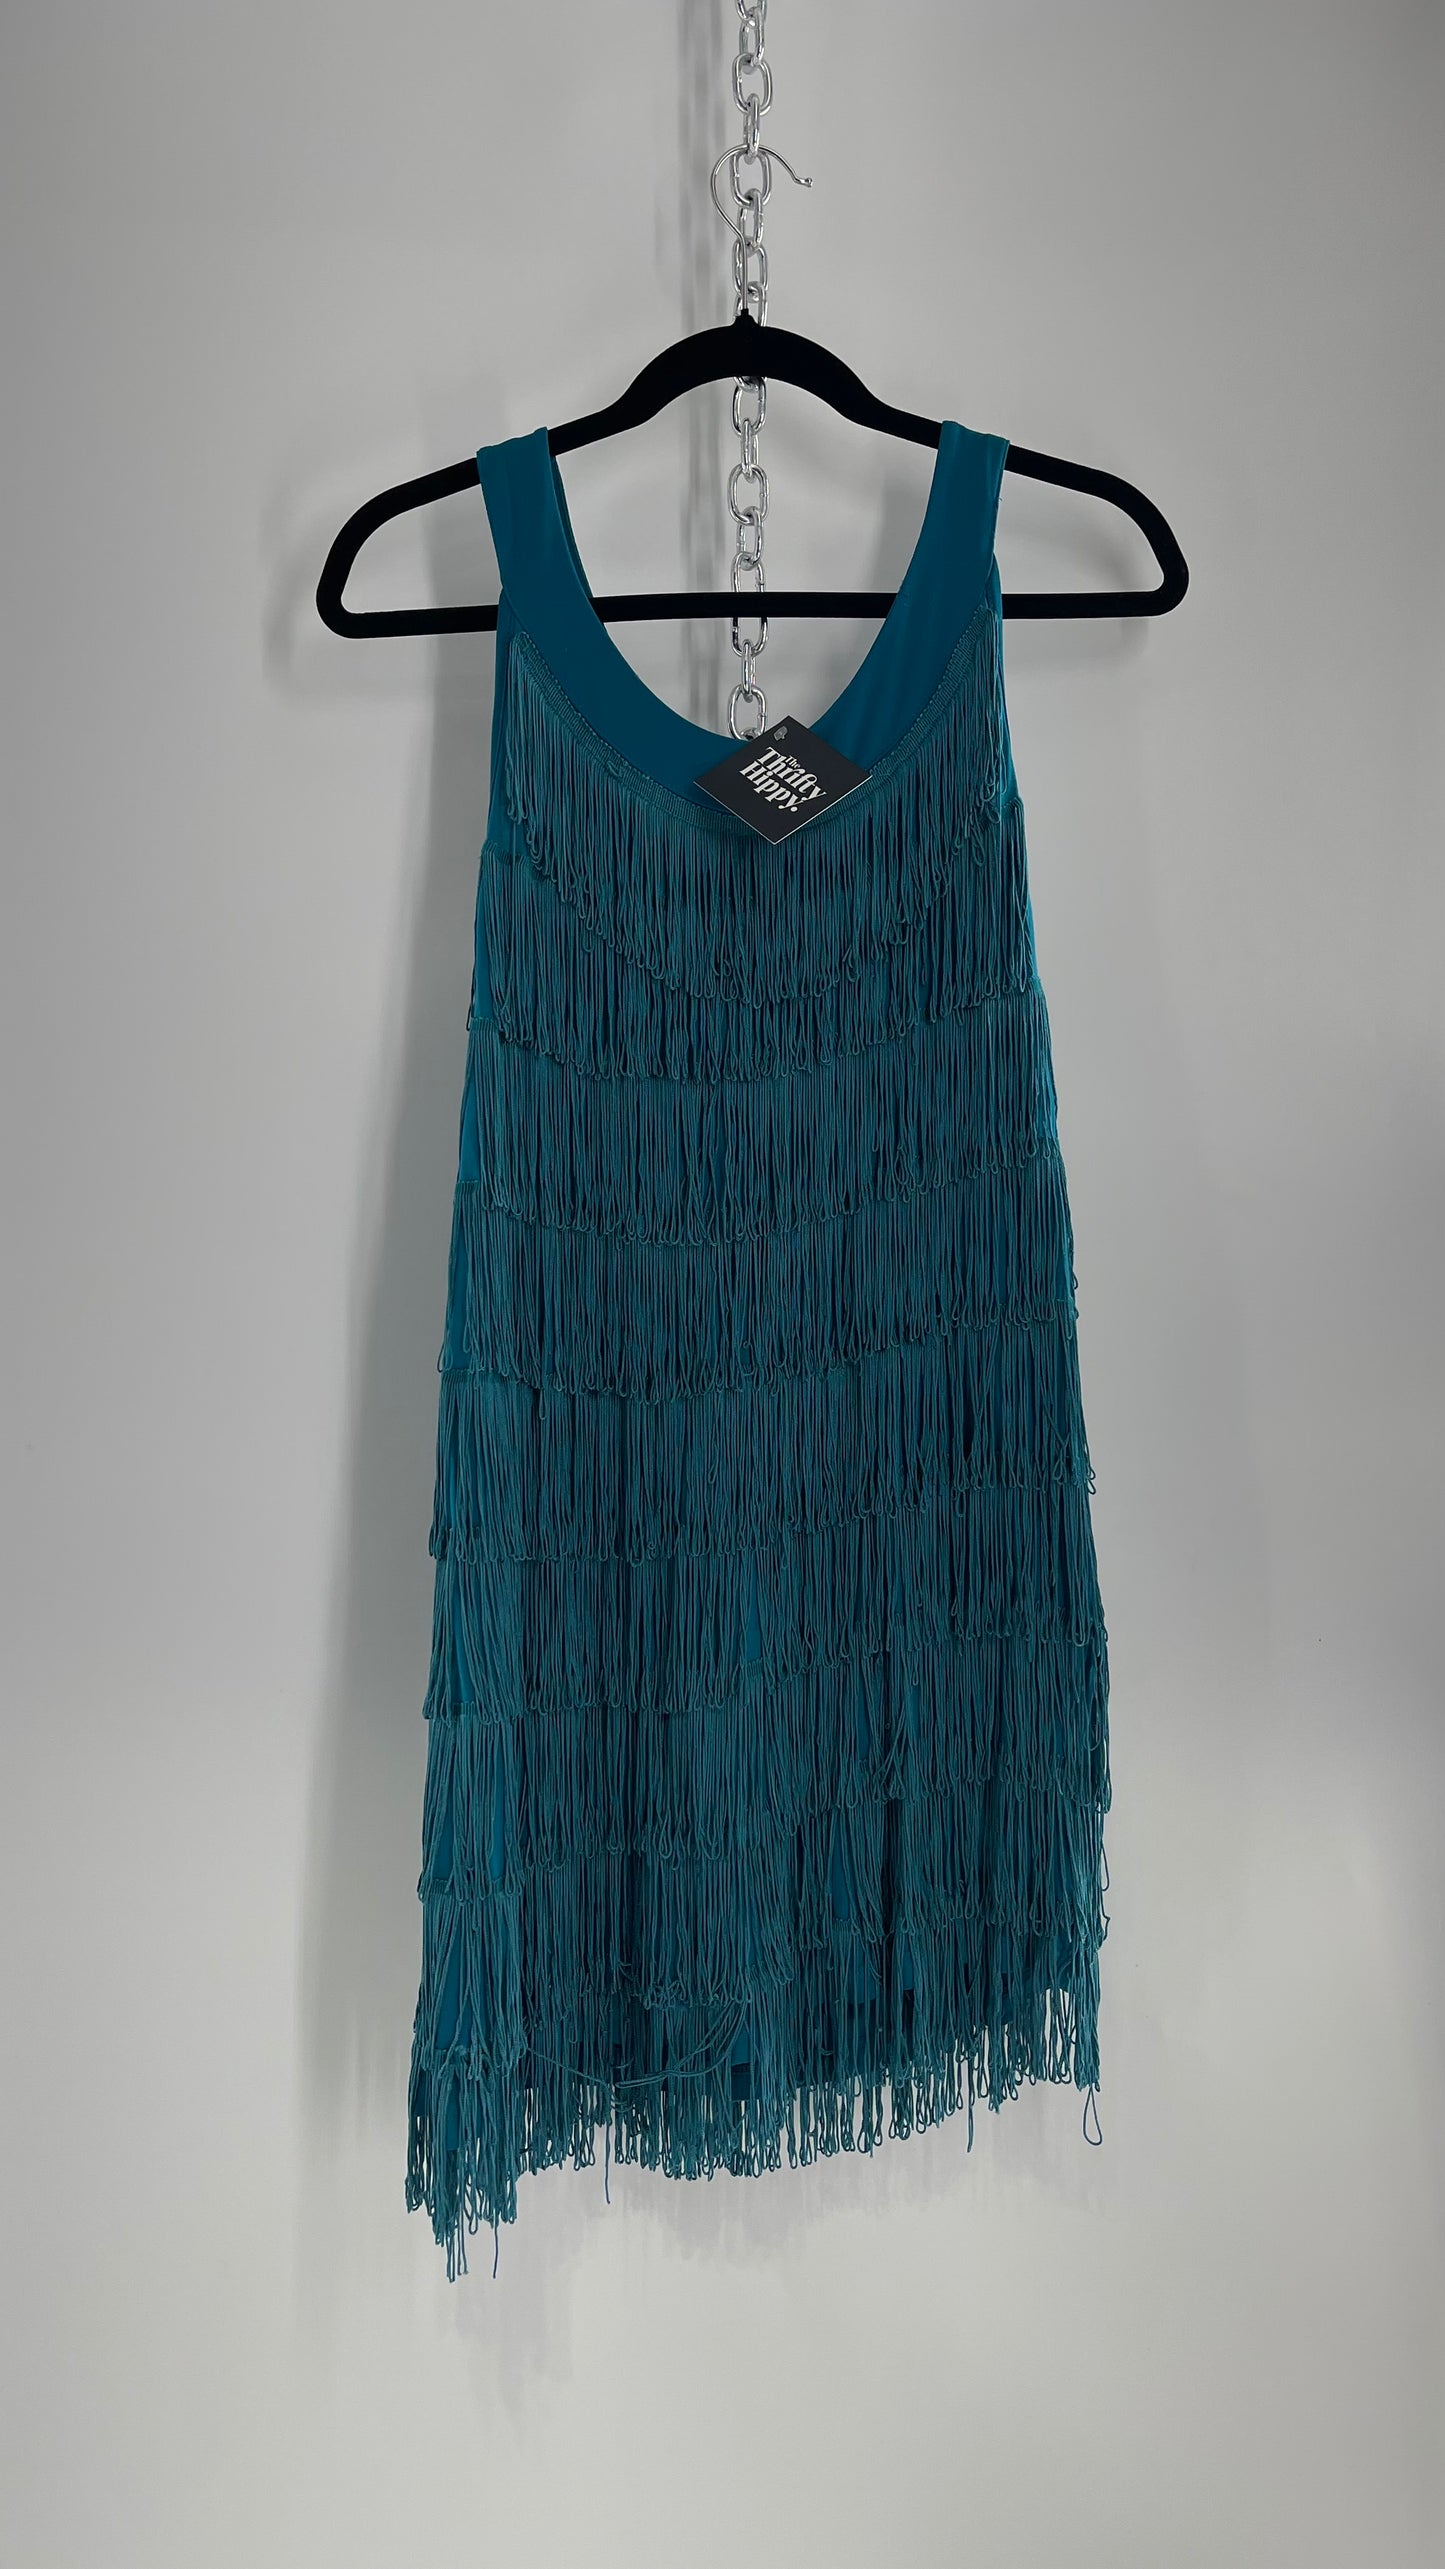 Vintage Teal Fringe Cowgirl Party Tunic Mini Dress (Small)